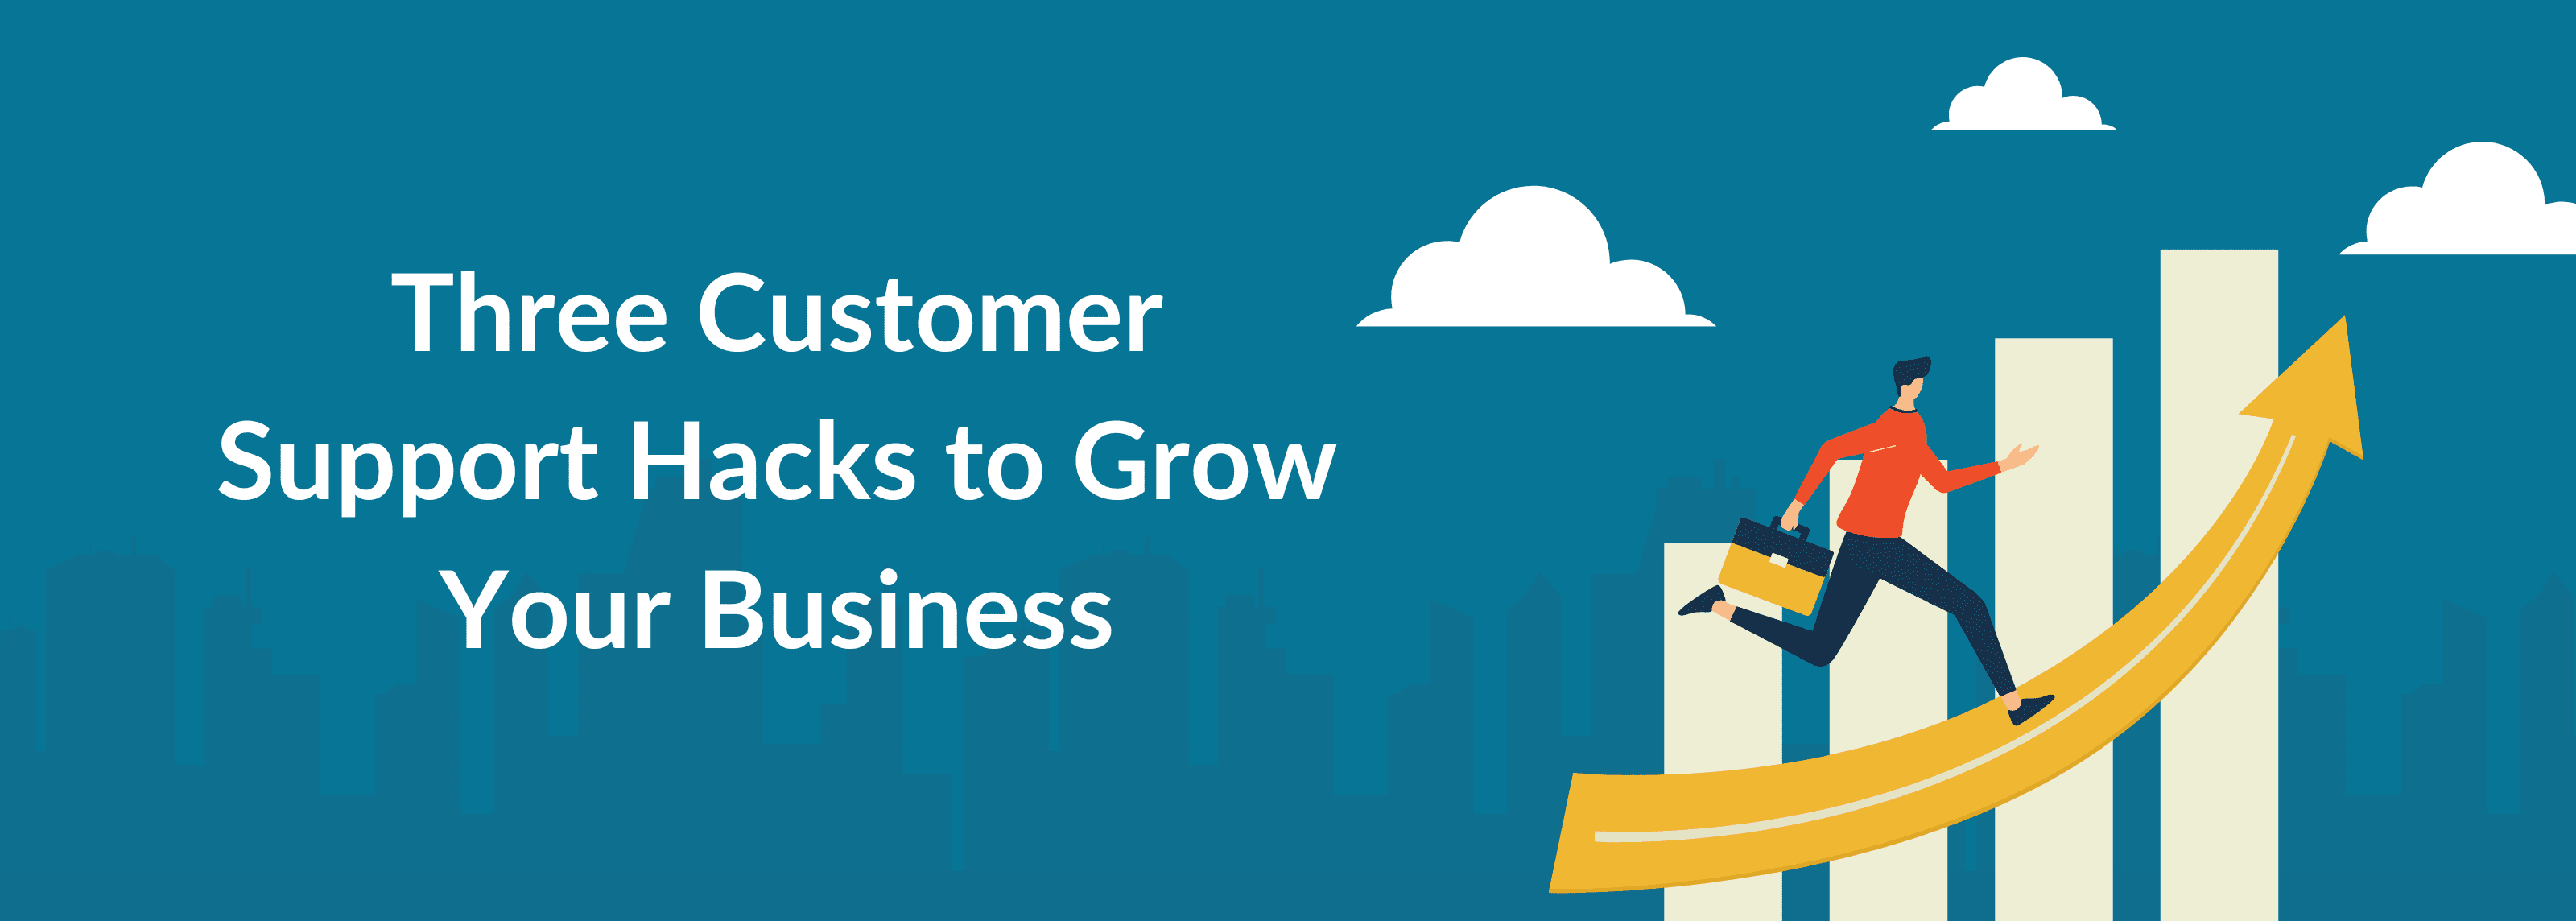 Customer Support Hacks to Grow Your Business